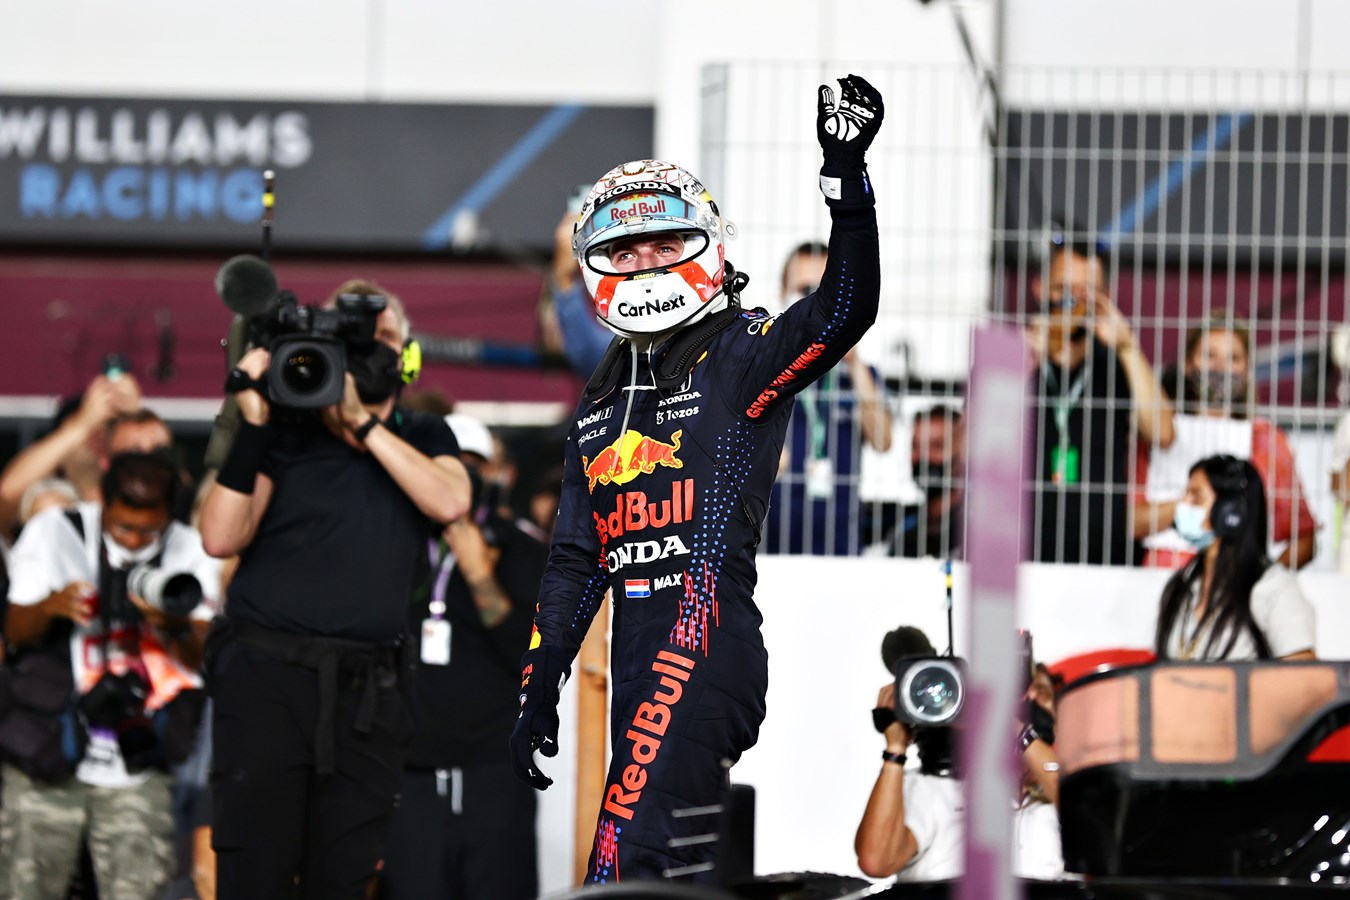 Red Bull Racing Honda Close The Gap In The Constructors' Championship, In Qatar #F1